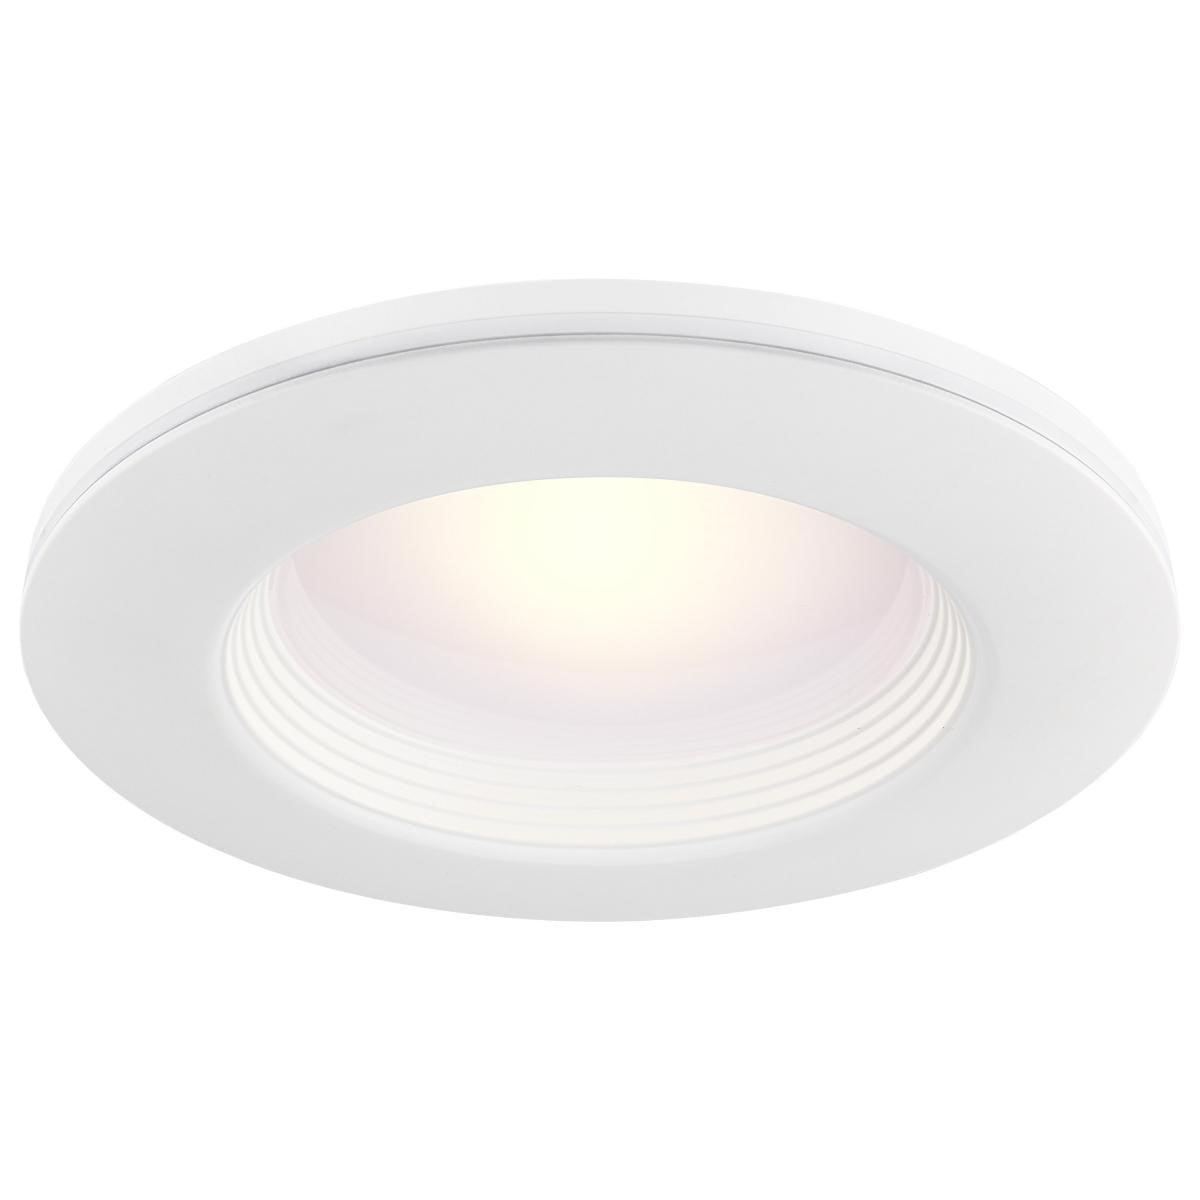 6 In. Recessed LED Can Light, 9 Watt, 800 Lumens, Selectable CCT, 2700K to 5000K, Baffle Trim with Night Light - Bees Lighting